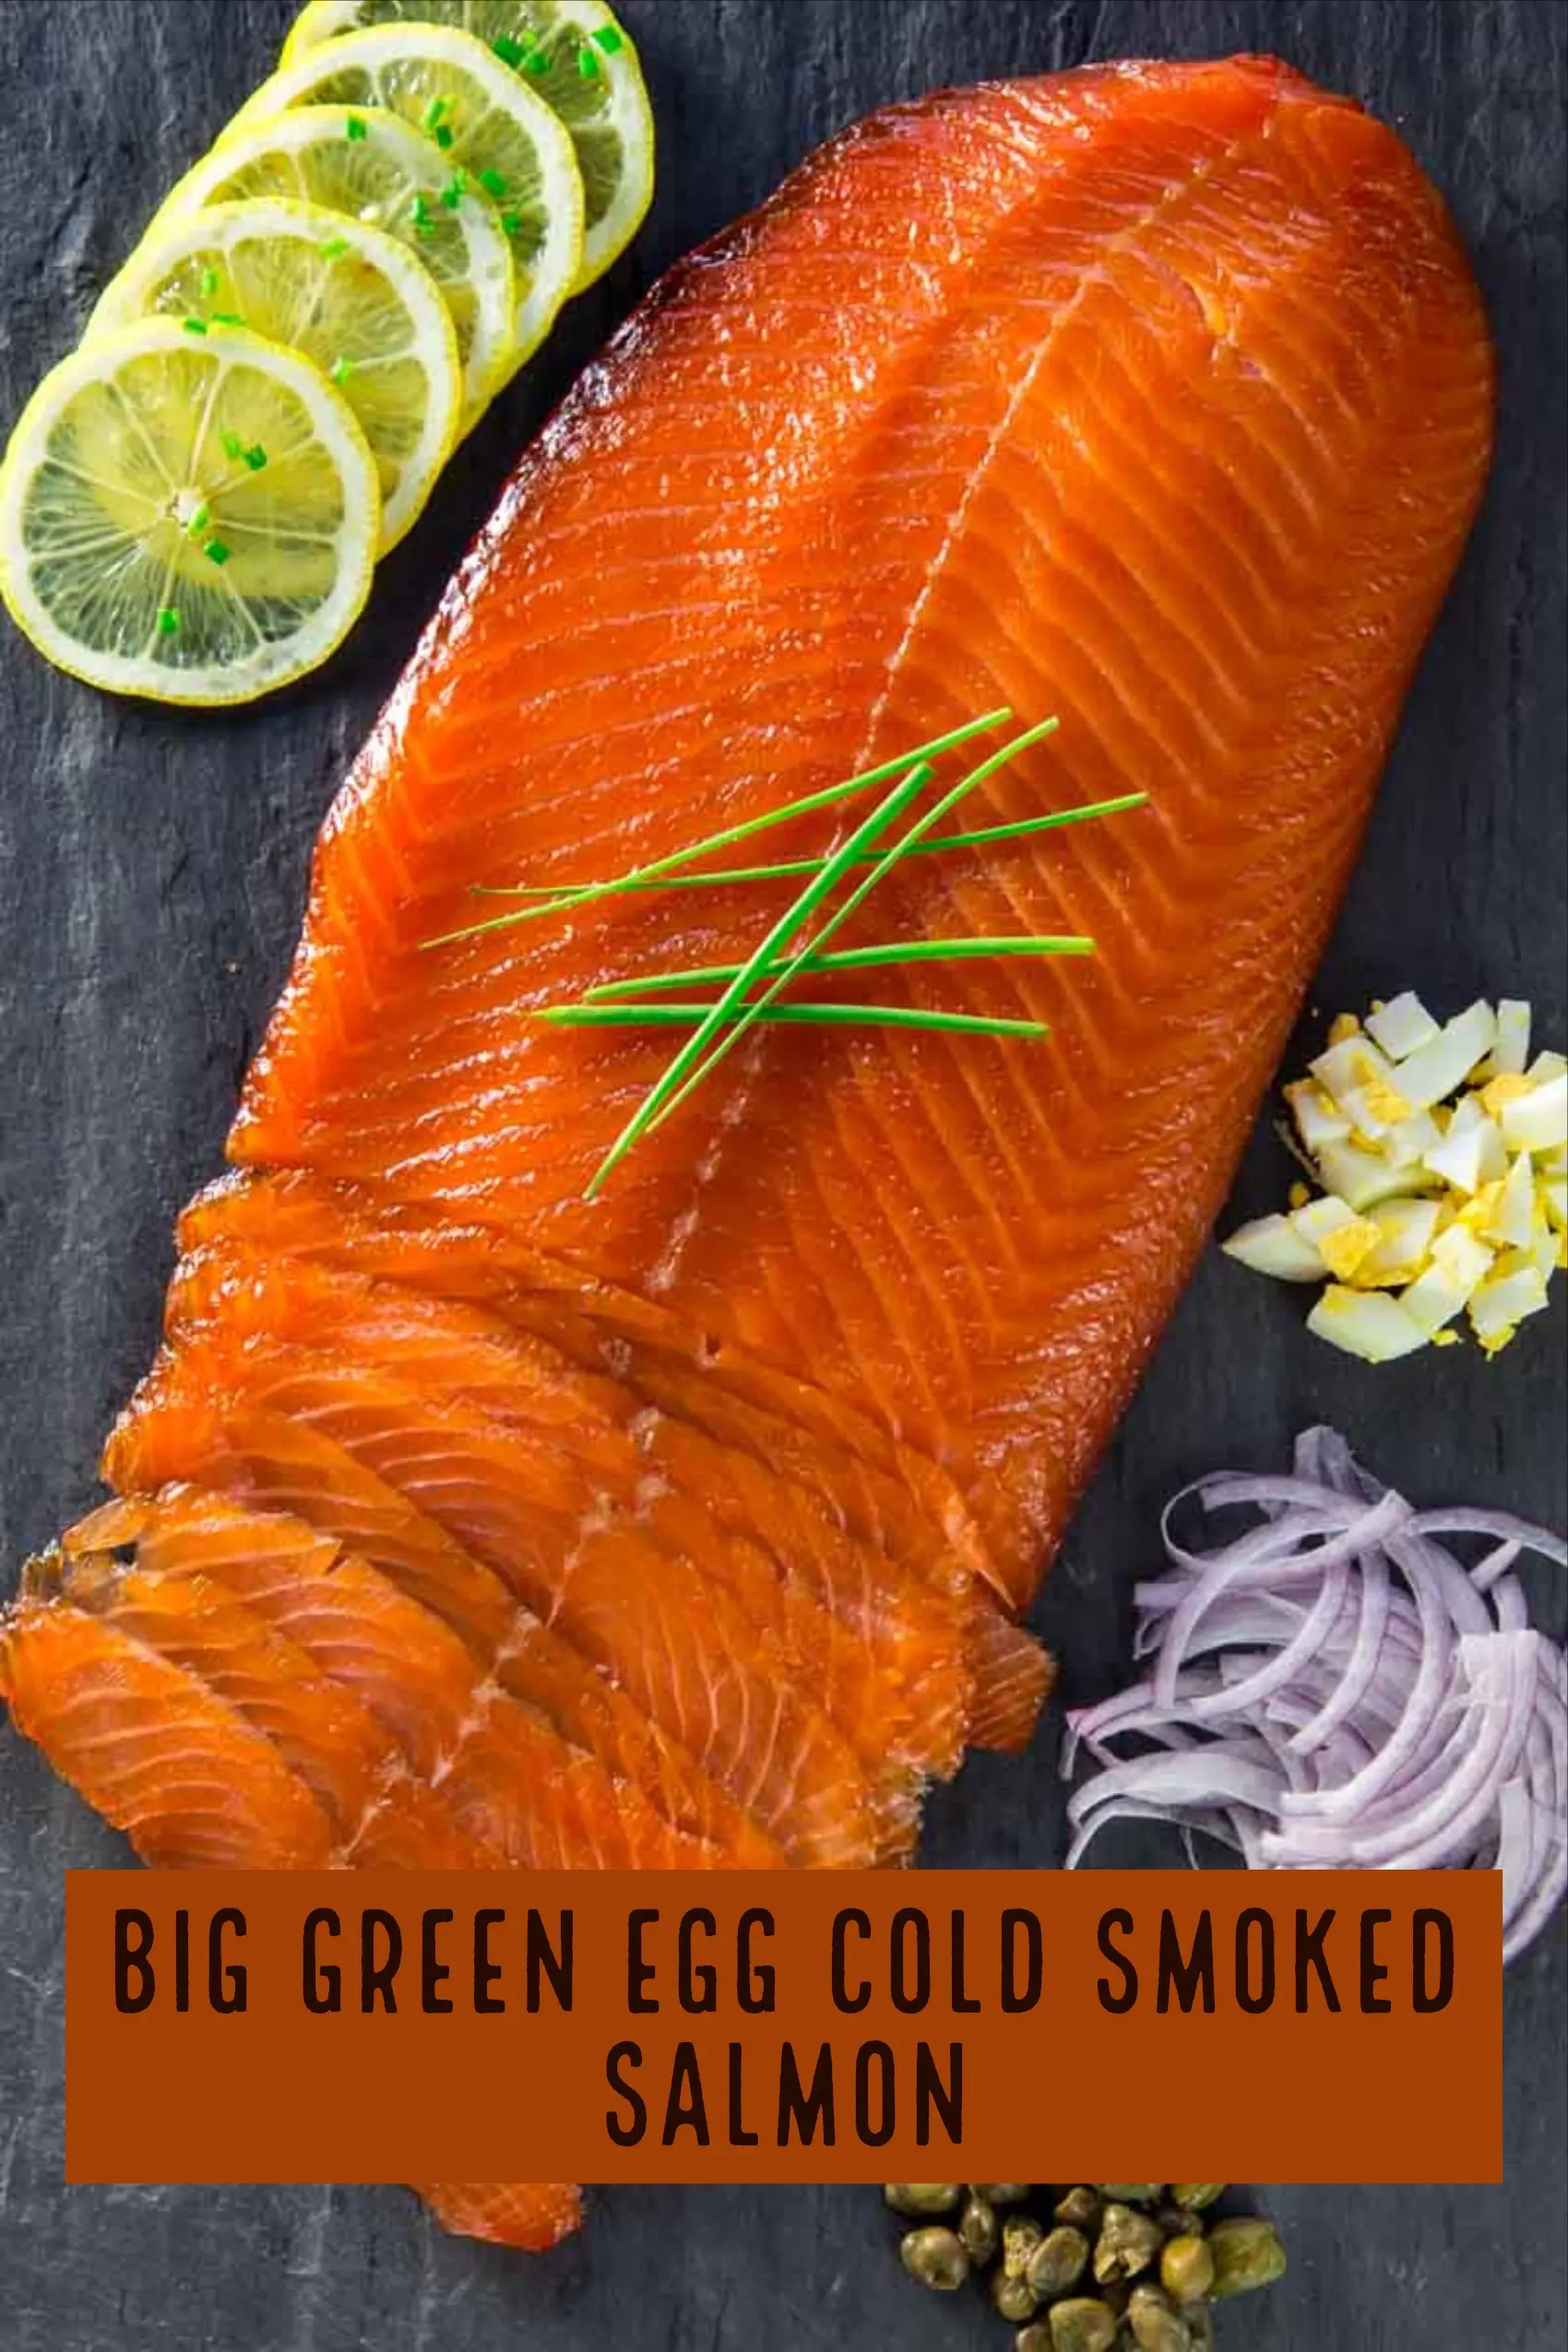 cold smoked salmon - Why is cold-smoked salmon expensive